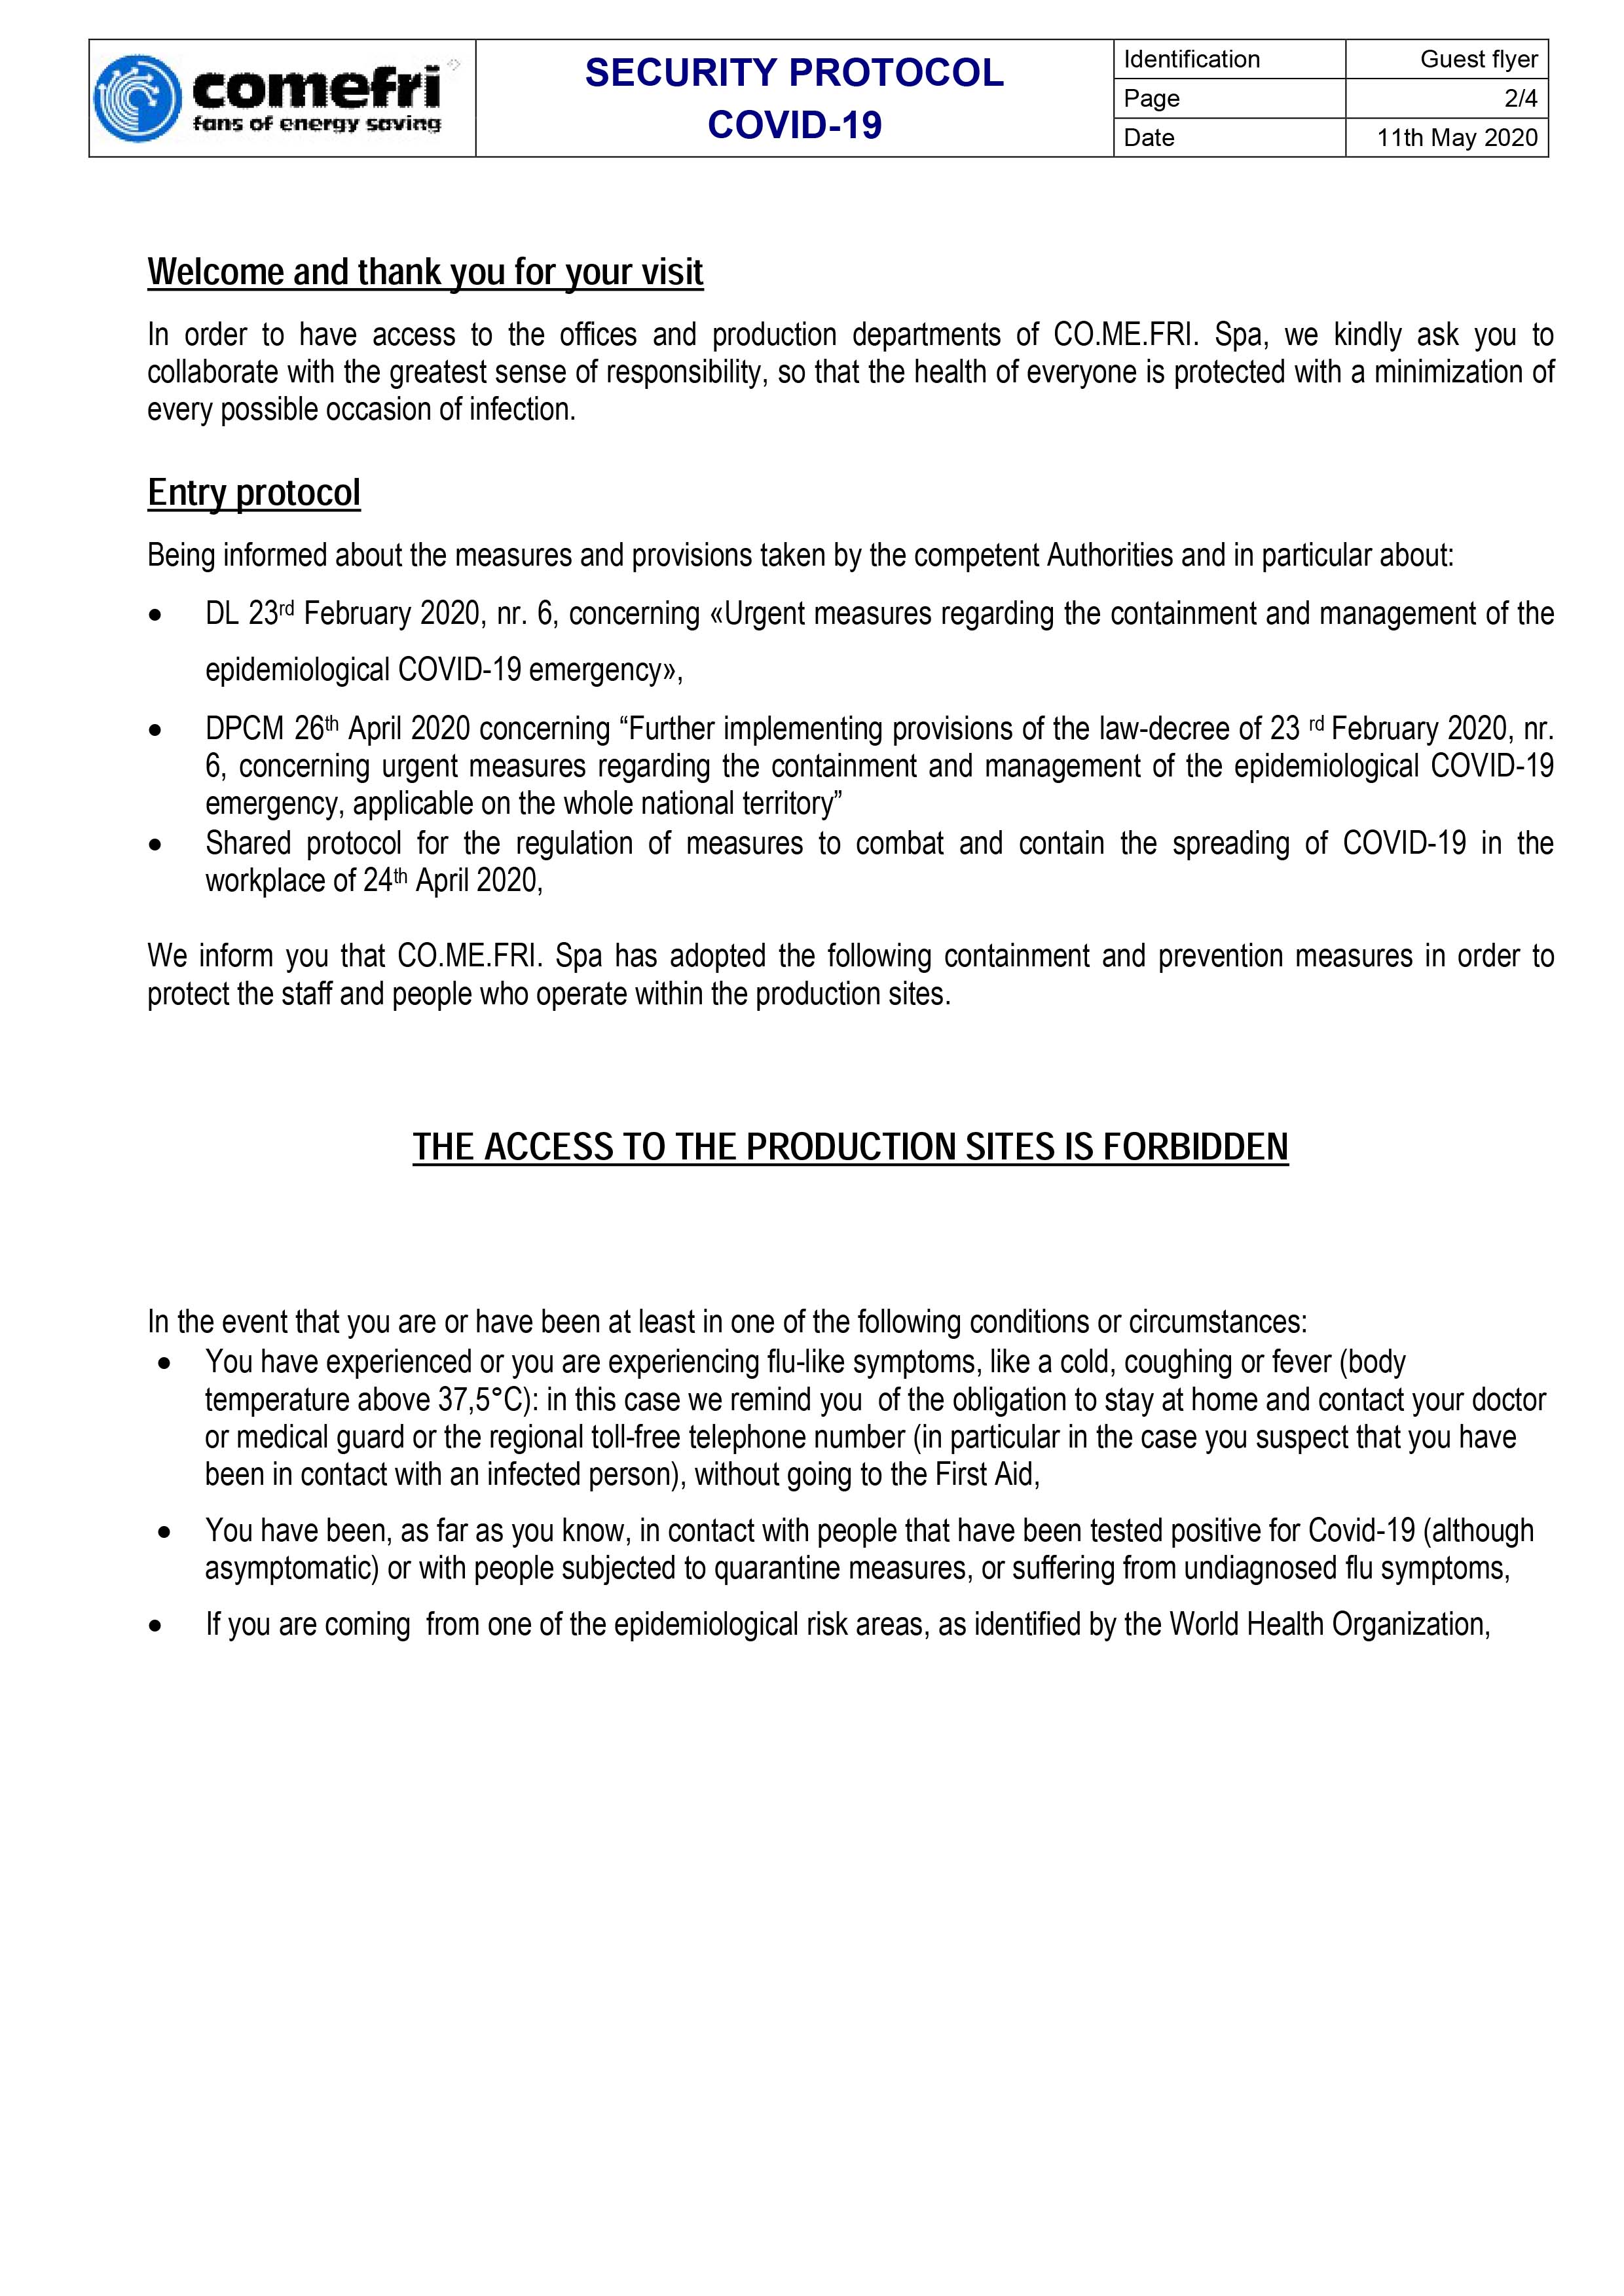 Security Protocol COVID-19 - Page 2